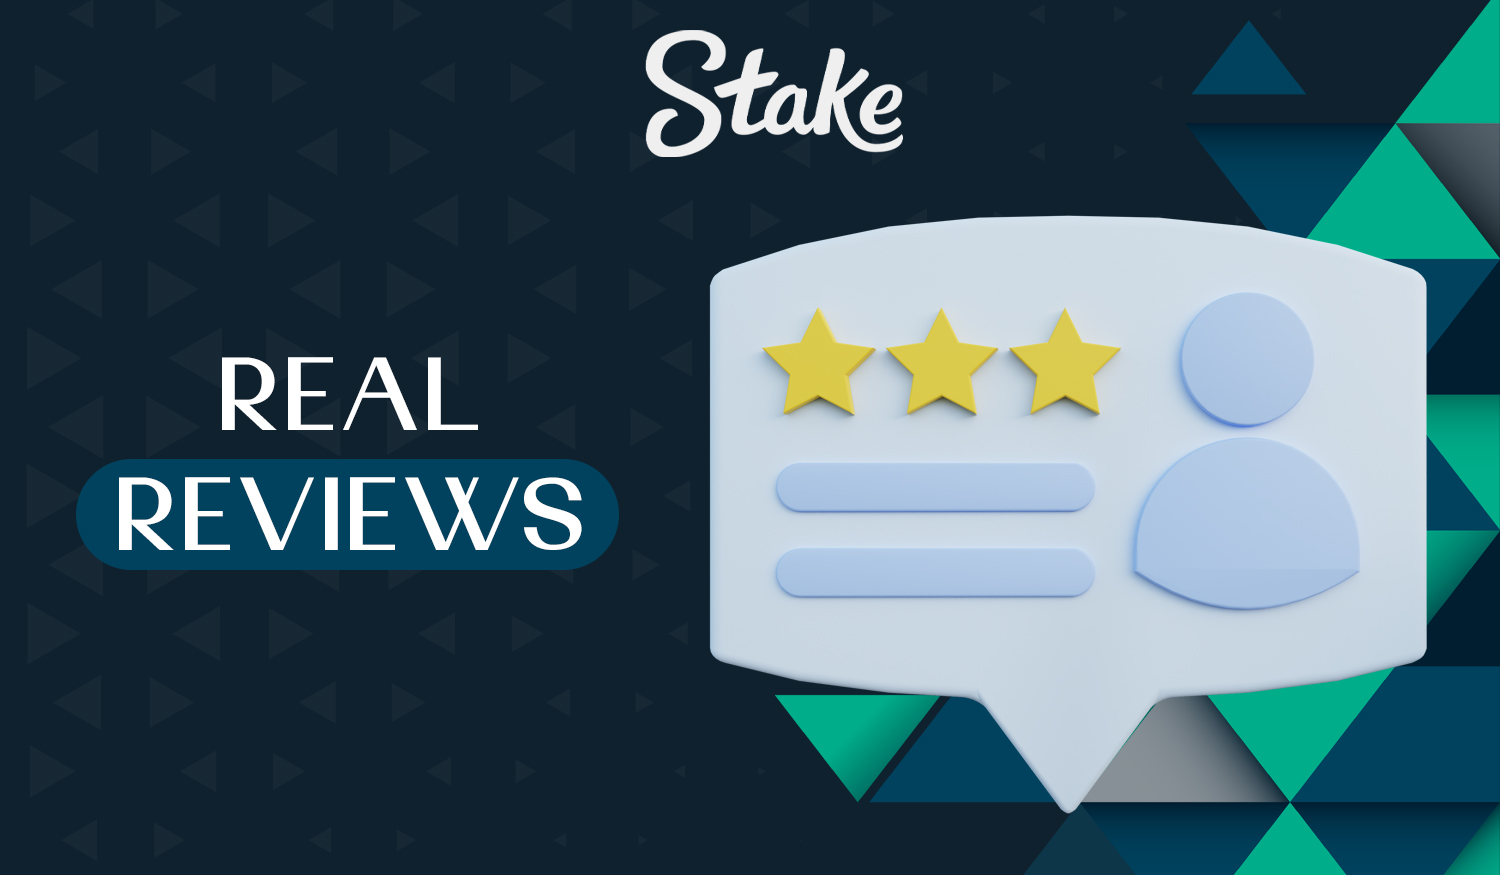 Real reviews from Stake users about all the details and usage